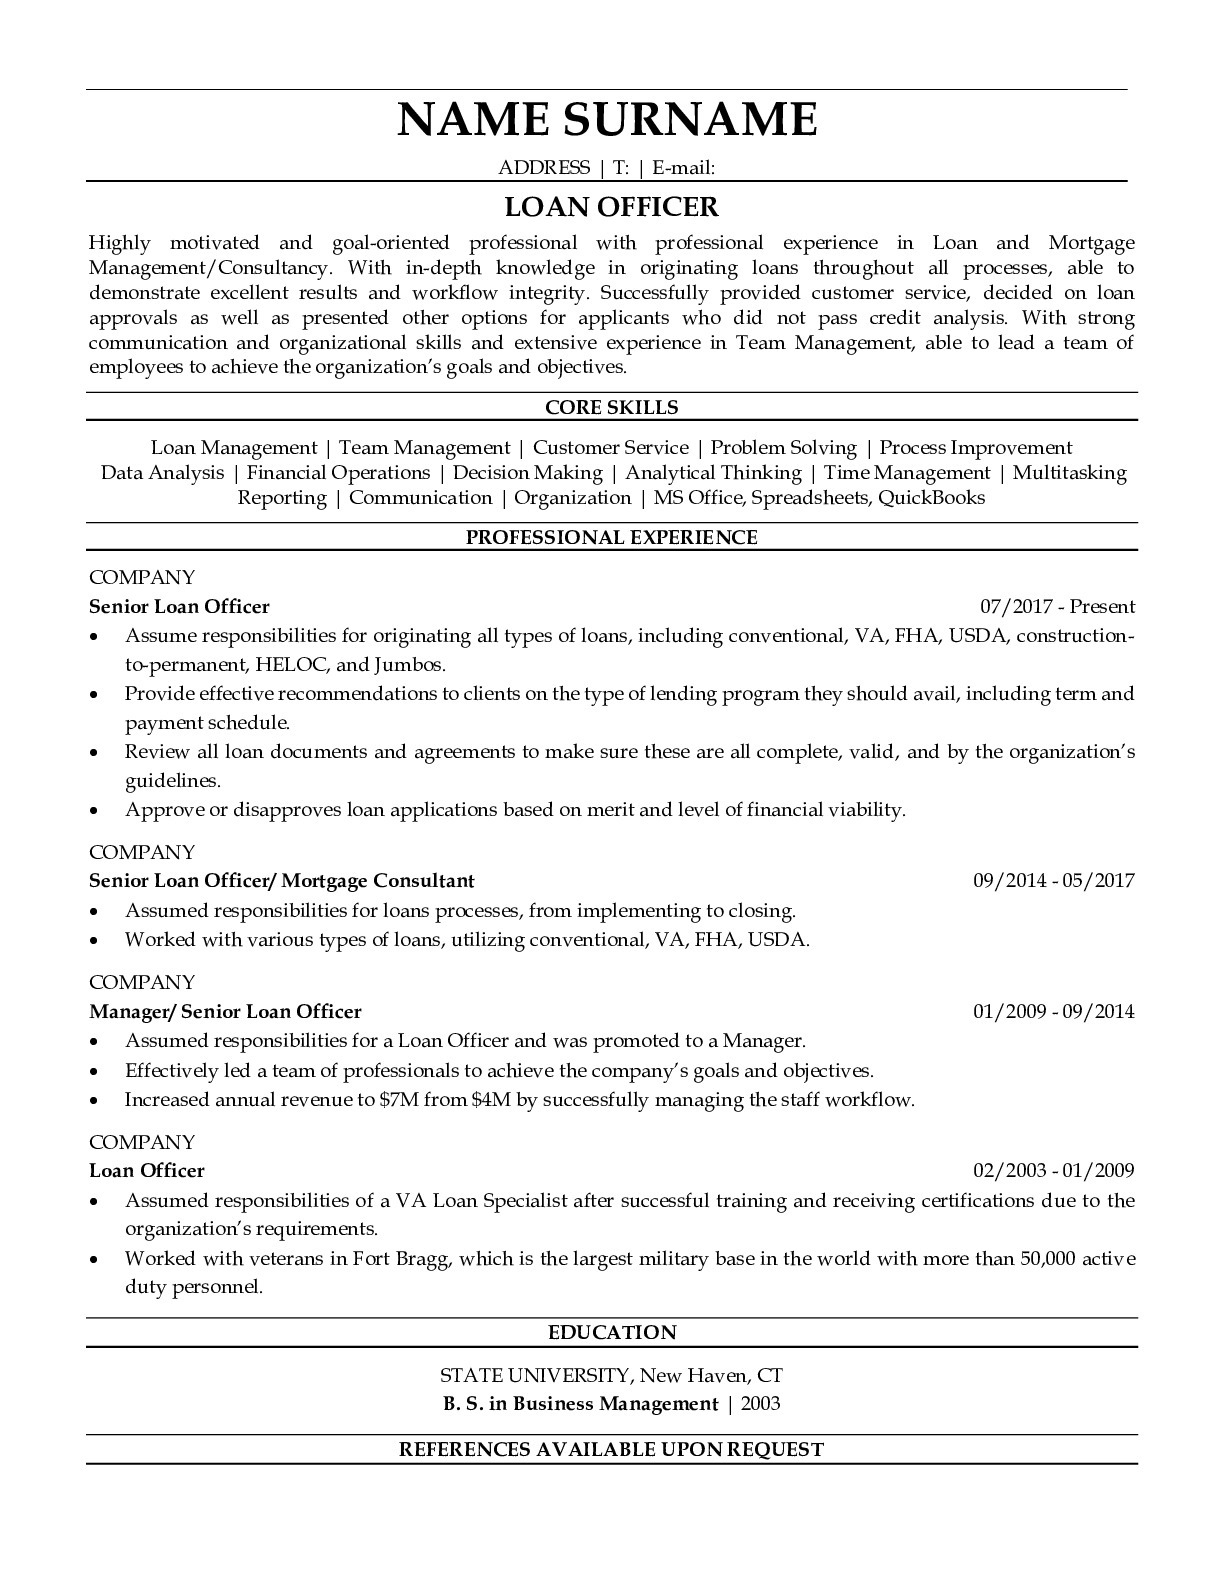 Resume Example for Loan Officer